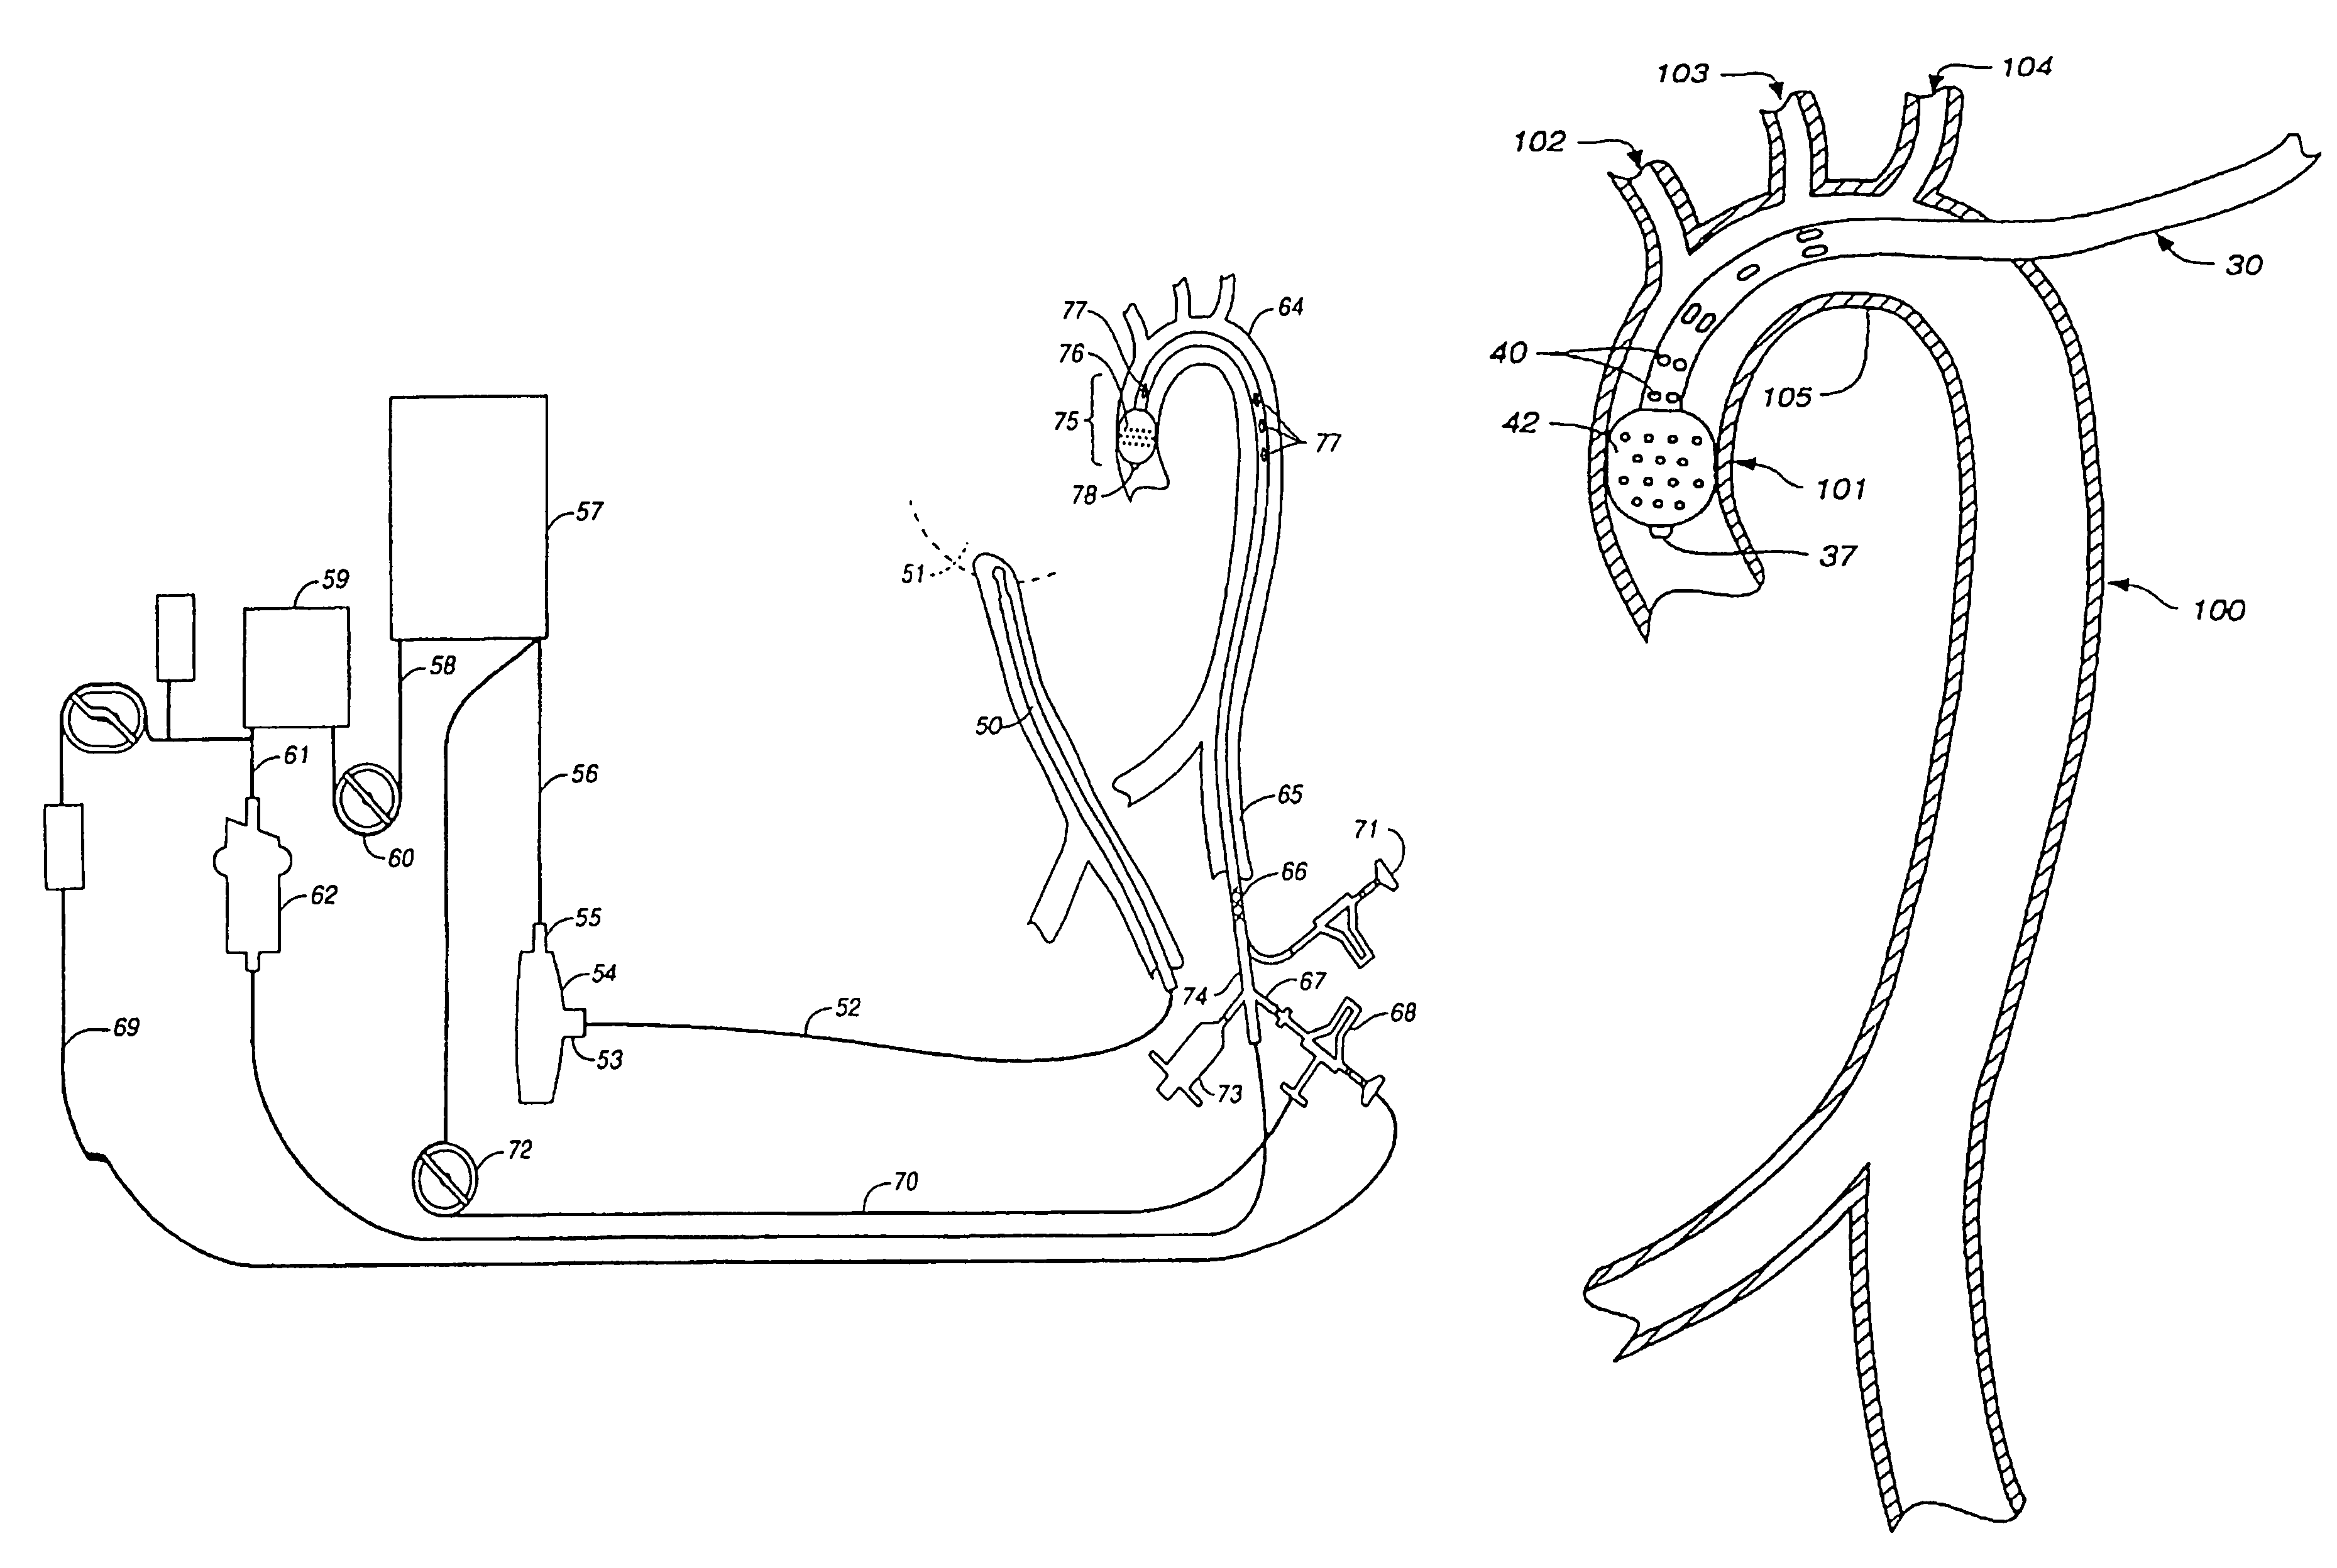 Venous cannula and cardiopulmonary bypass system